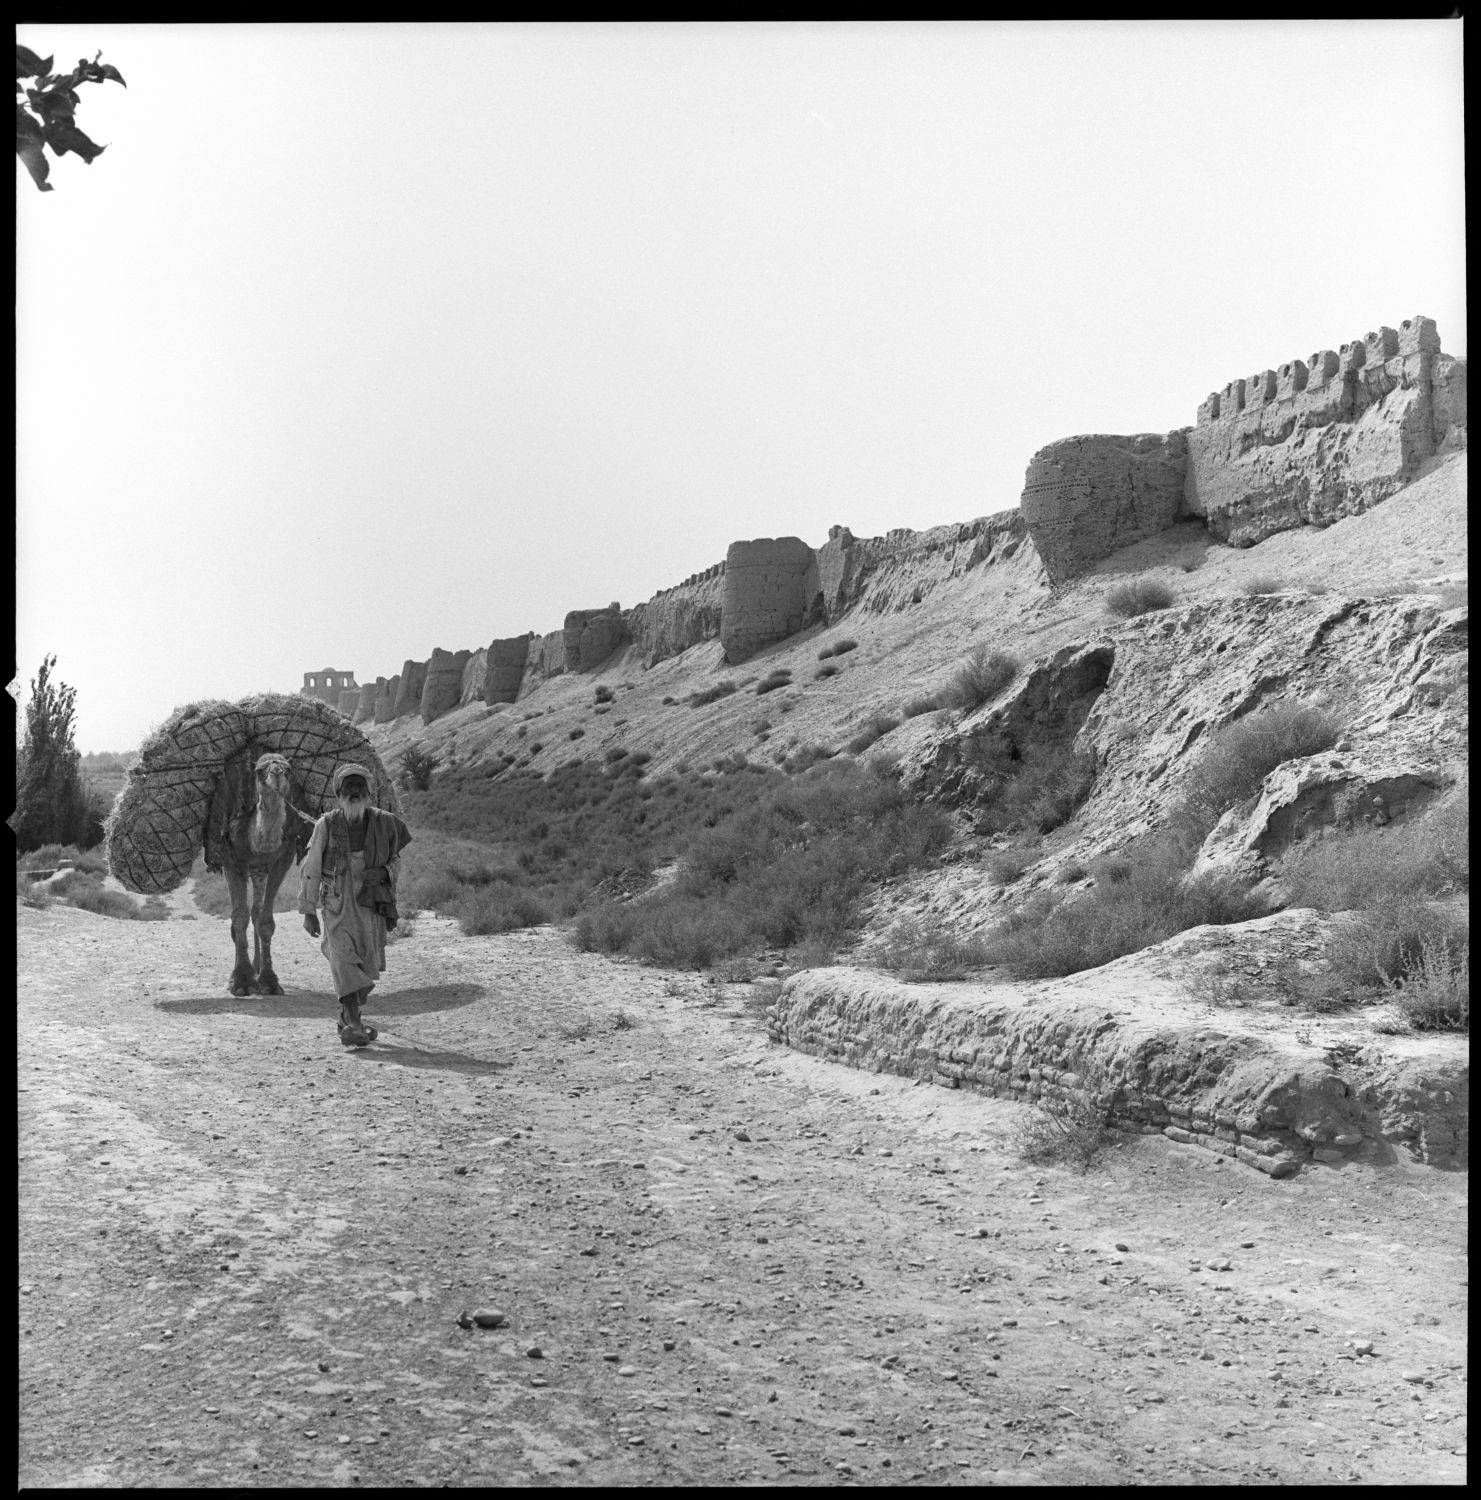 Exterior view showing ramparts, with man and a camel passing by.